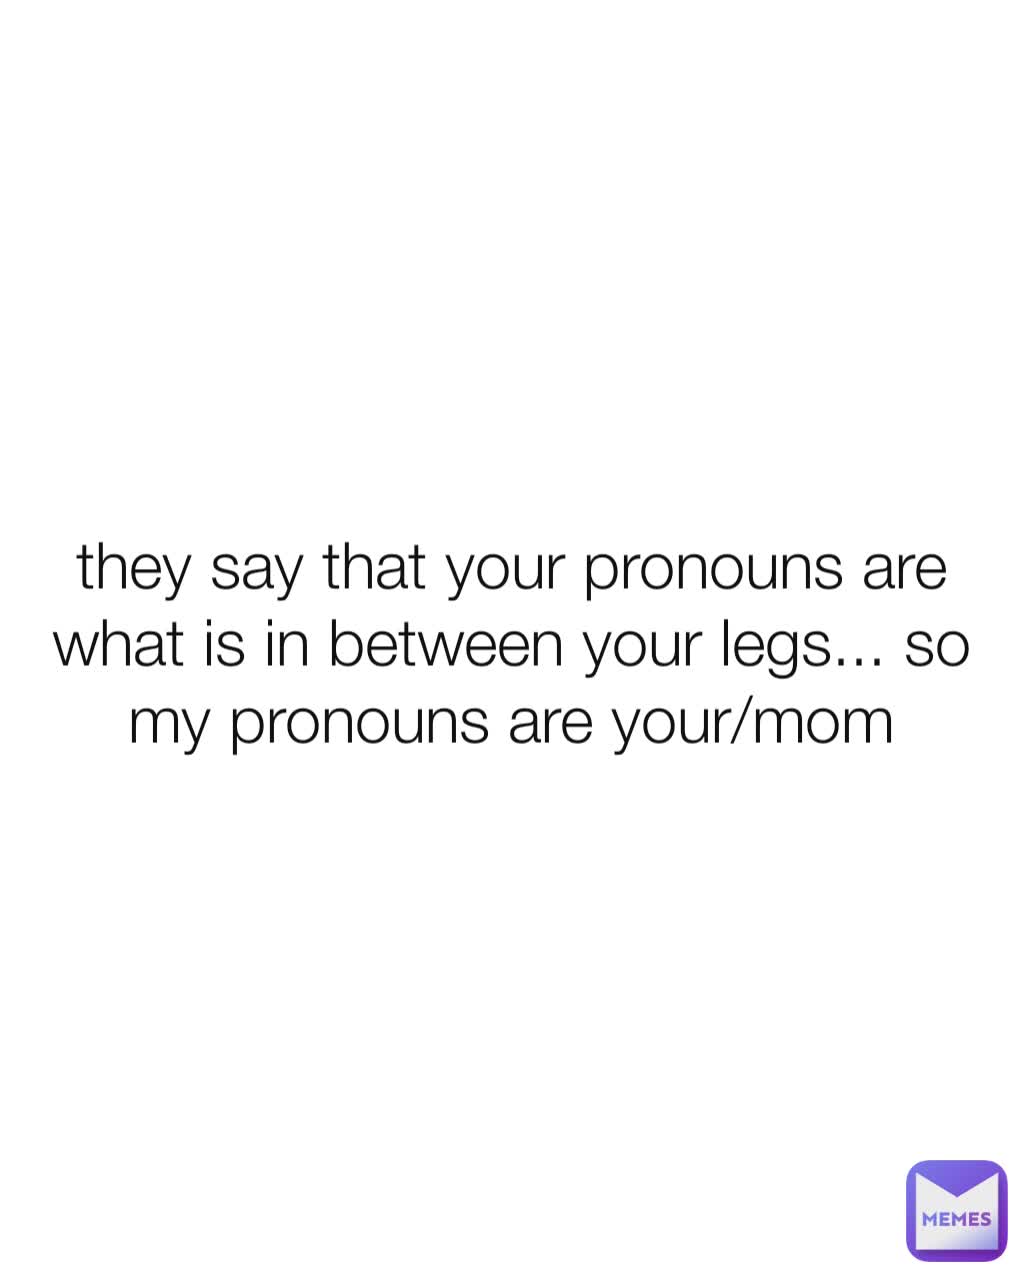 they-say-that-your-pronouns-are-what-is-in-between-your-legs-so-my-pronouns-are-your-mom